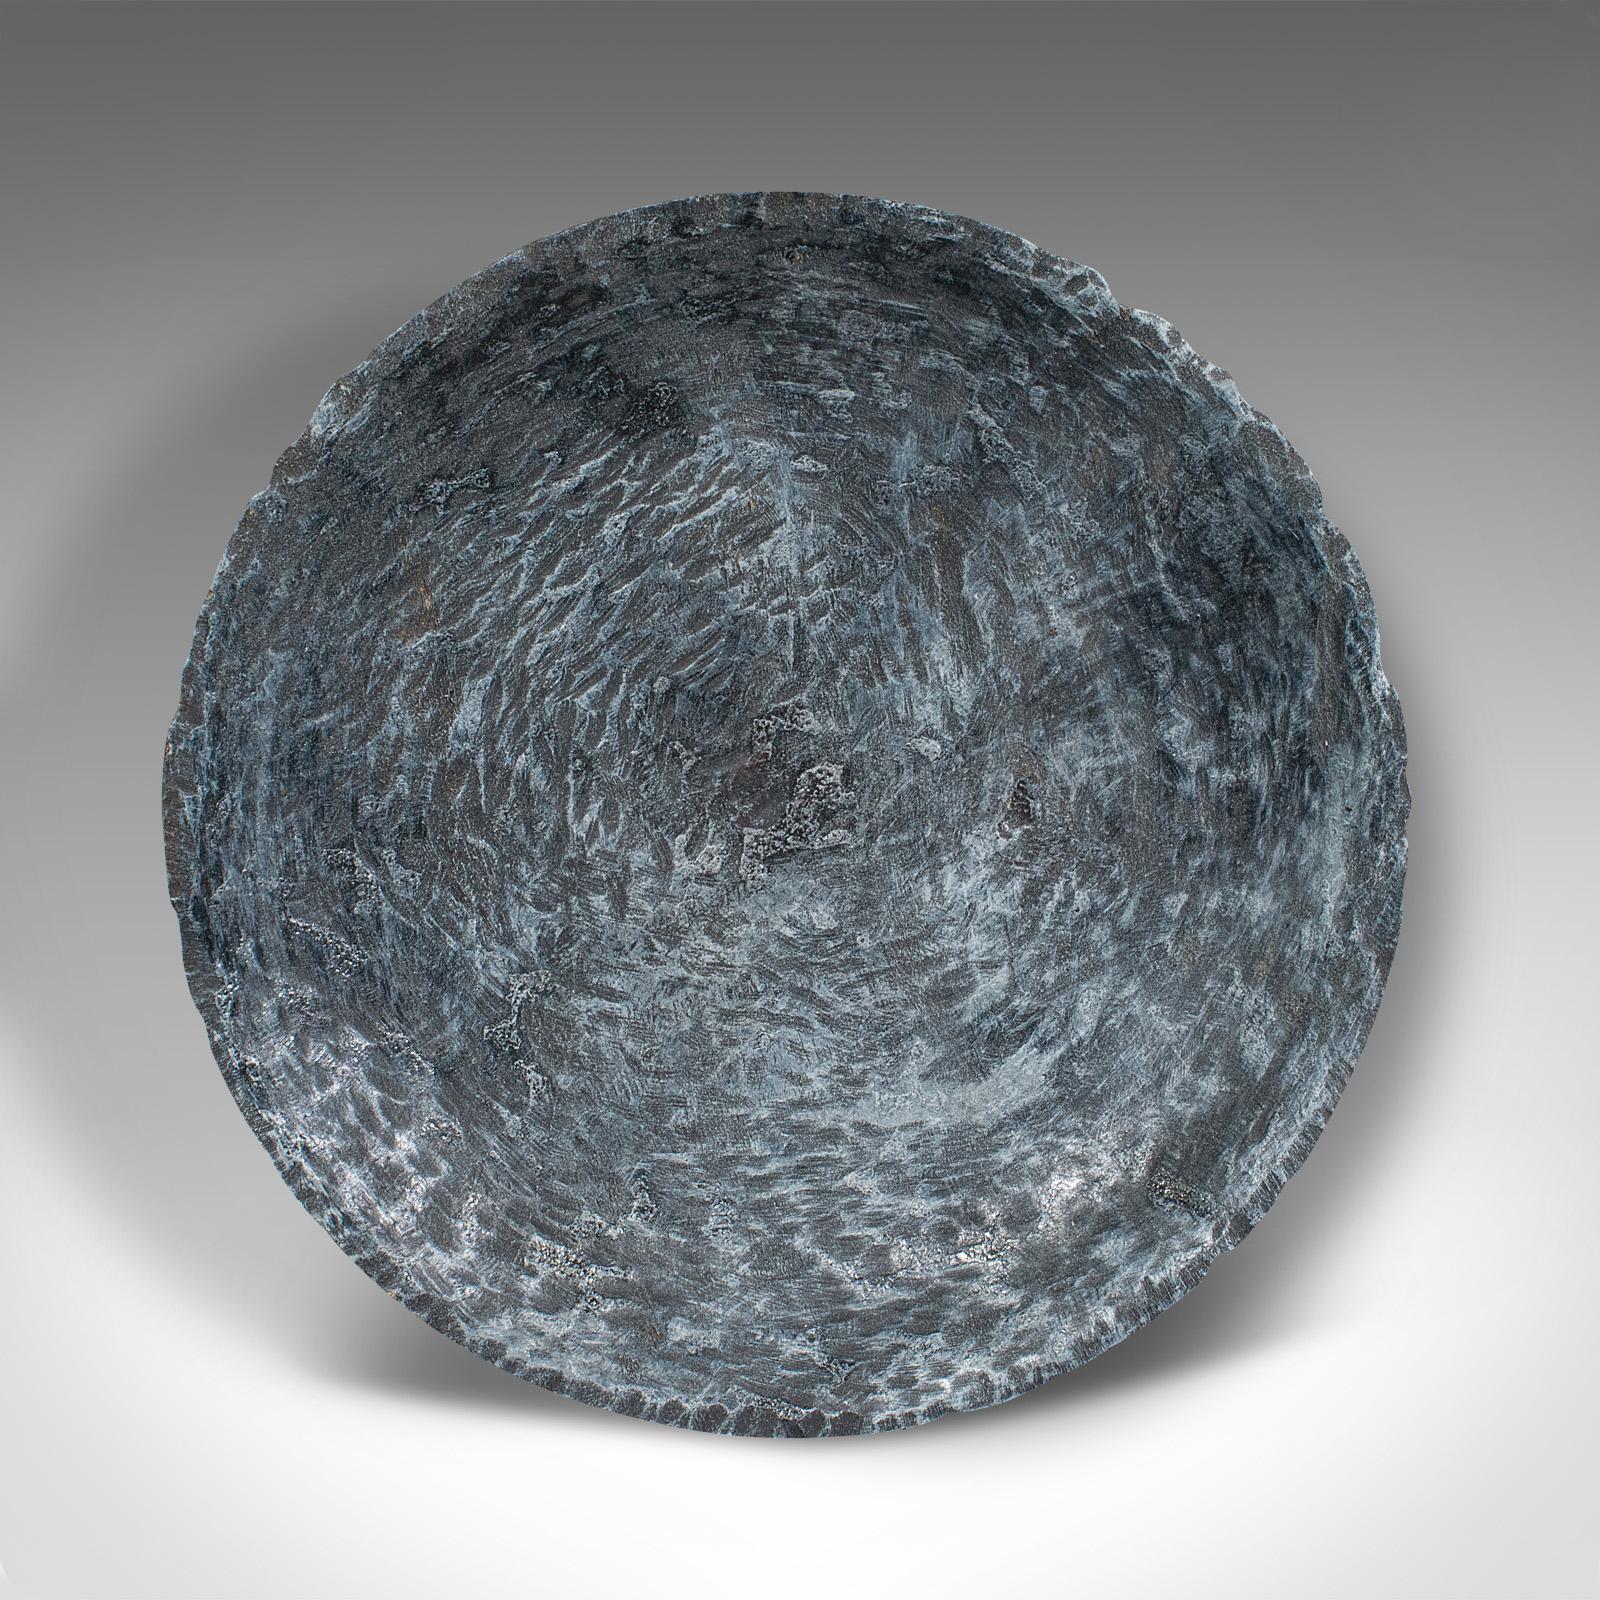 This is a bespoke art plate. An English, monkey puzzle decorative hand turned charger, dating to the 21st century.

Turned by Chris Fisher, also know as The Blind Woodturner
Displays a fascinating interpretation of the textures of the Derbyshire